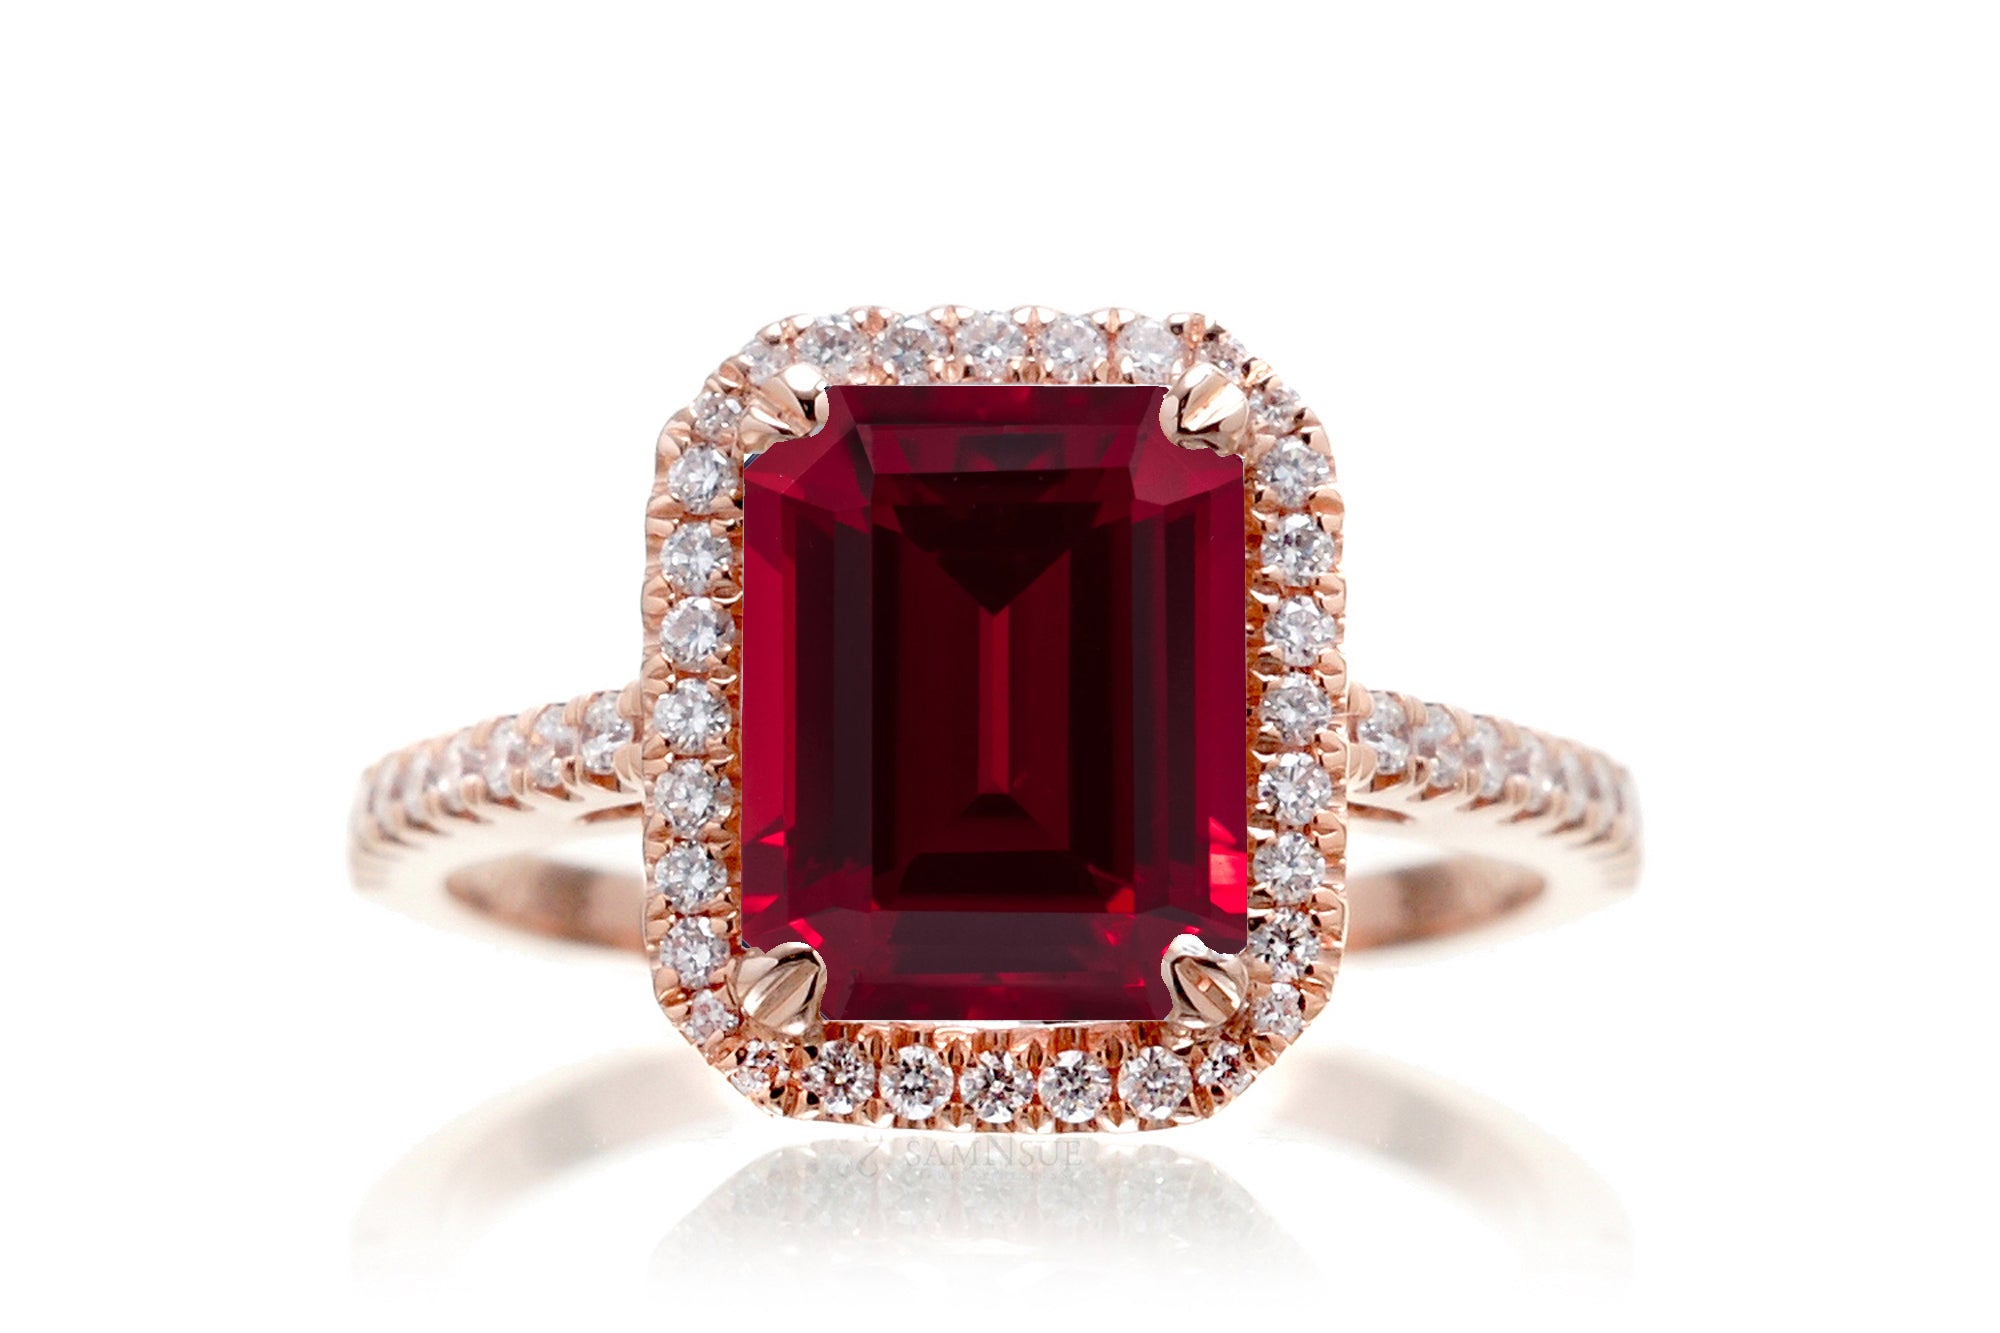 Emerald Cut Chatham Ruby With Diamond Halo Engagement Ring | The Signature Ring In Rose Gold